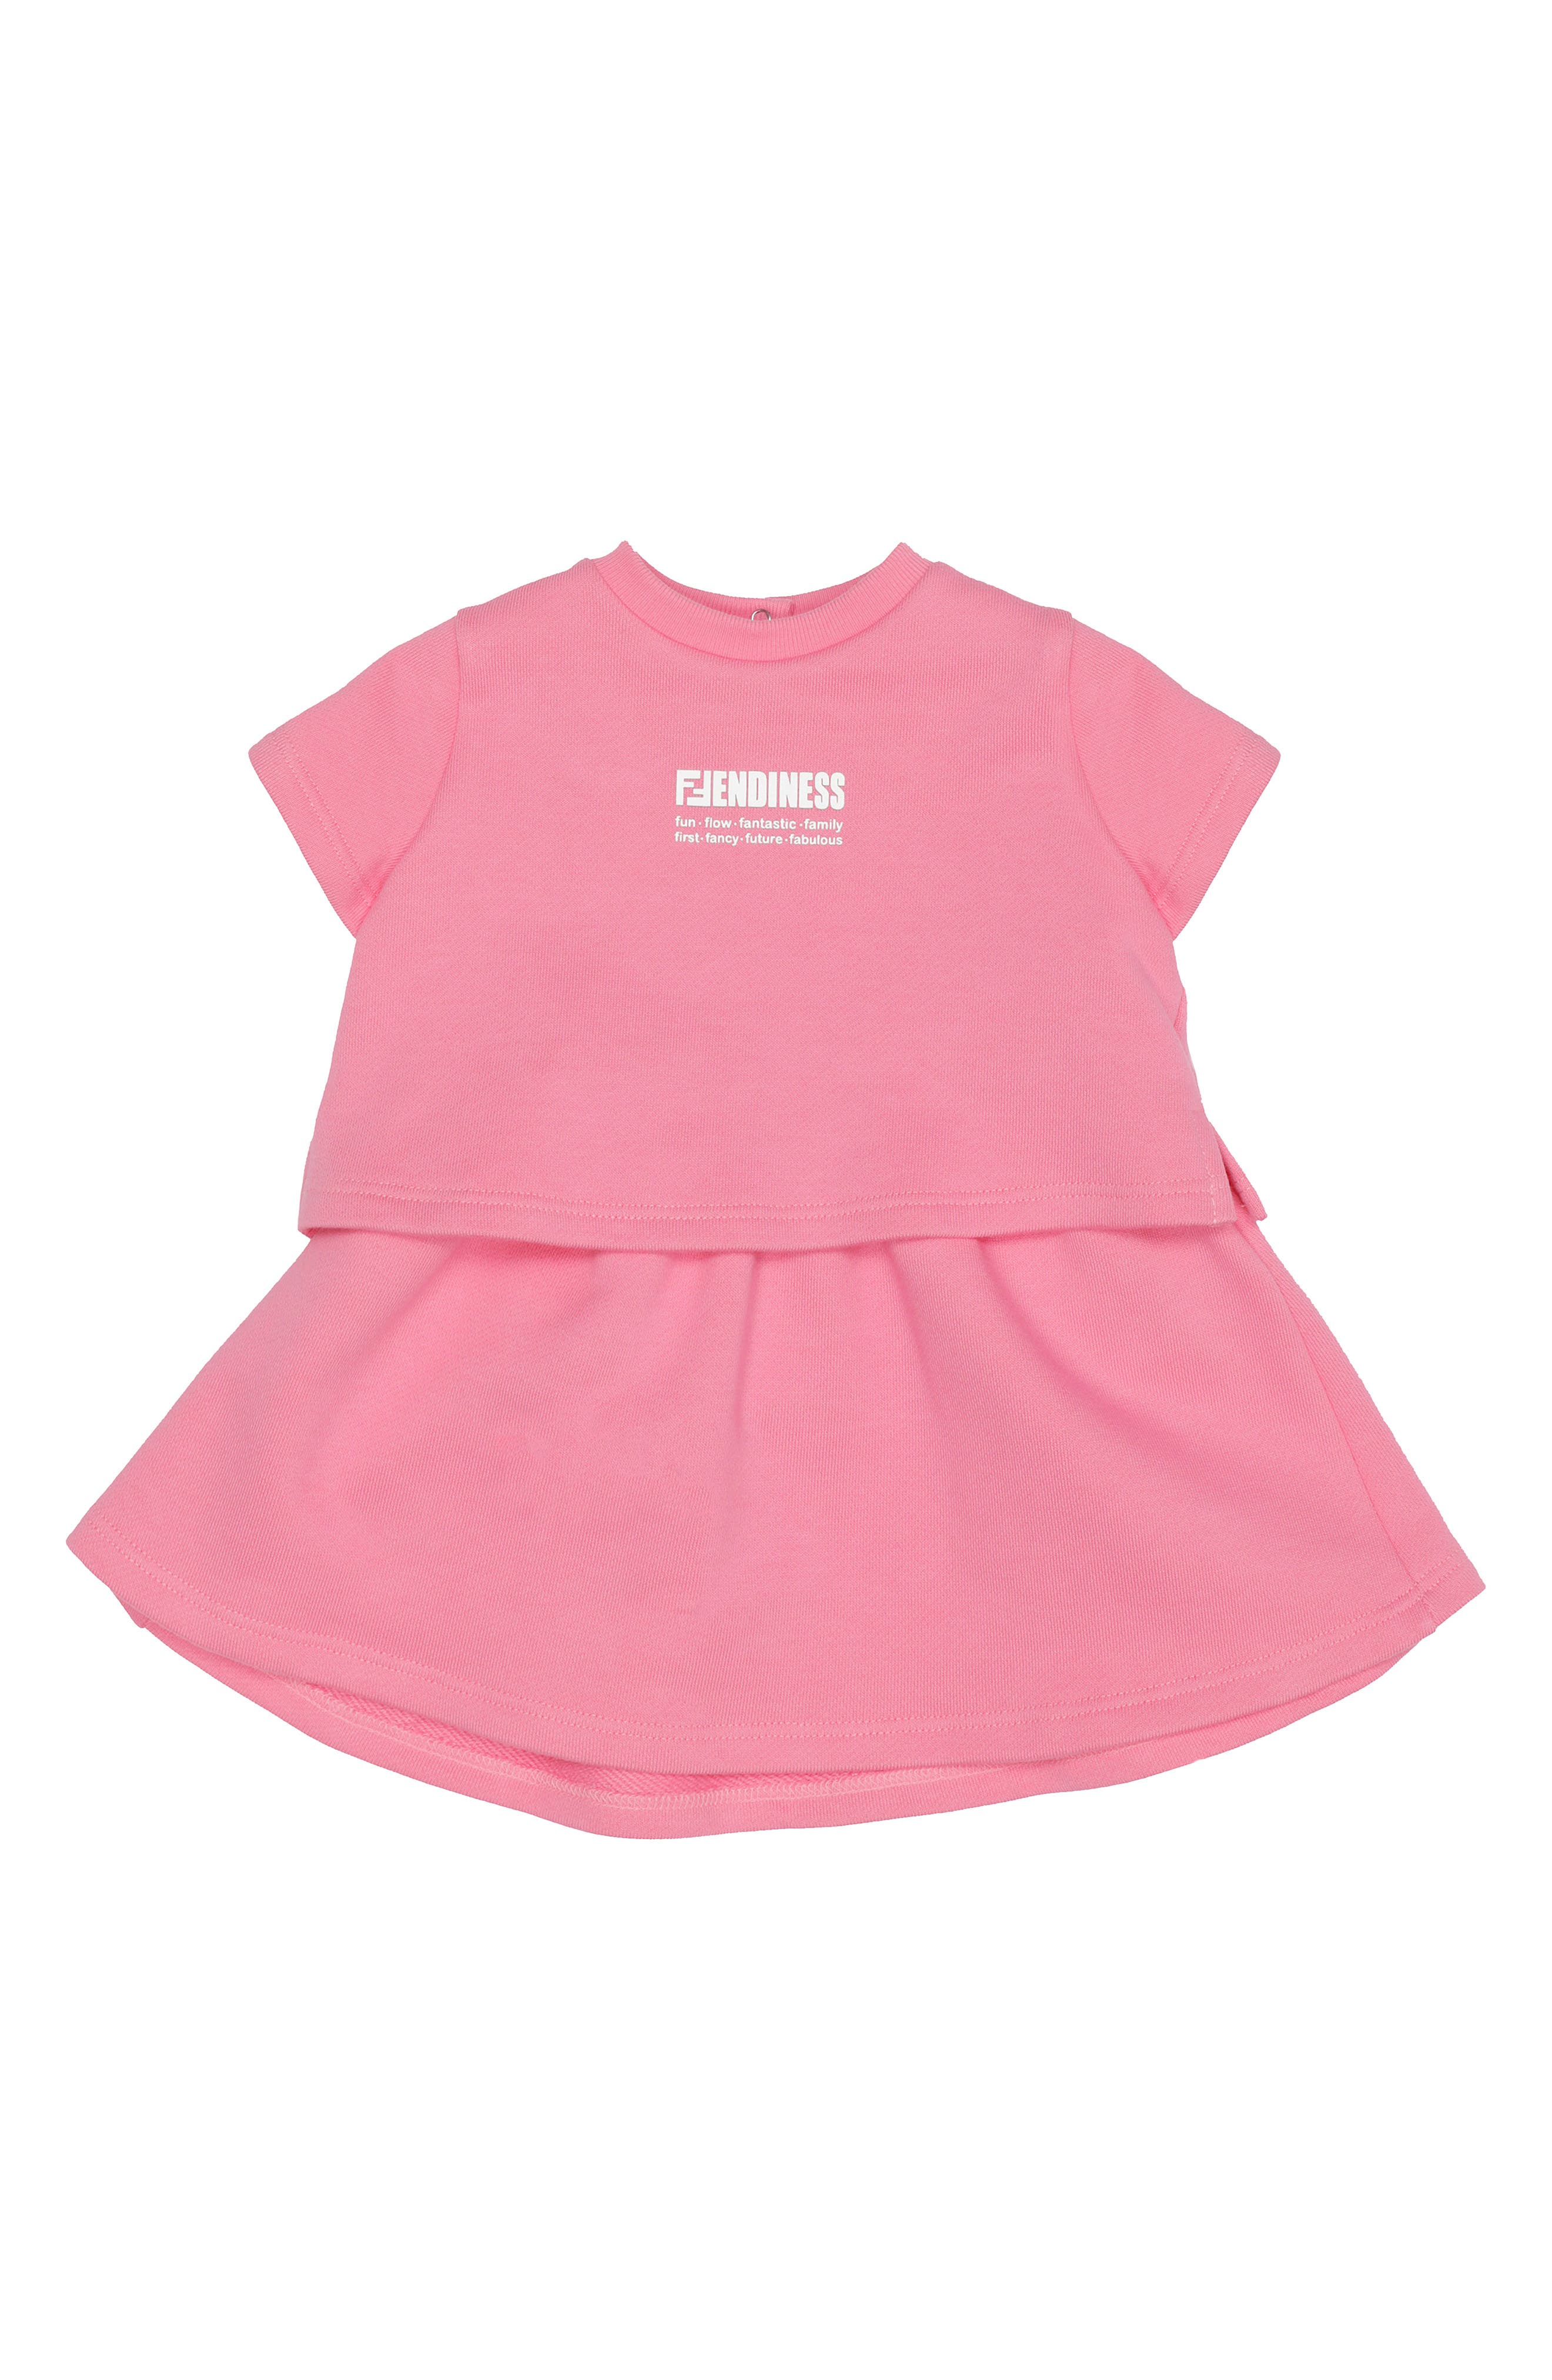 Fendiness Graphic Dress in Bright Pink at Nordstrom, Size 6M Us